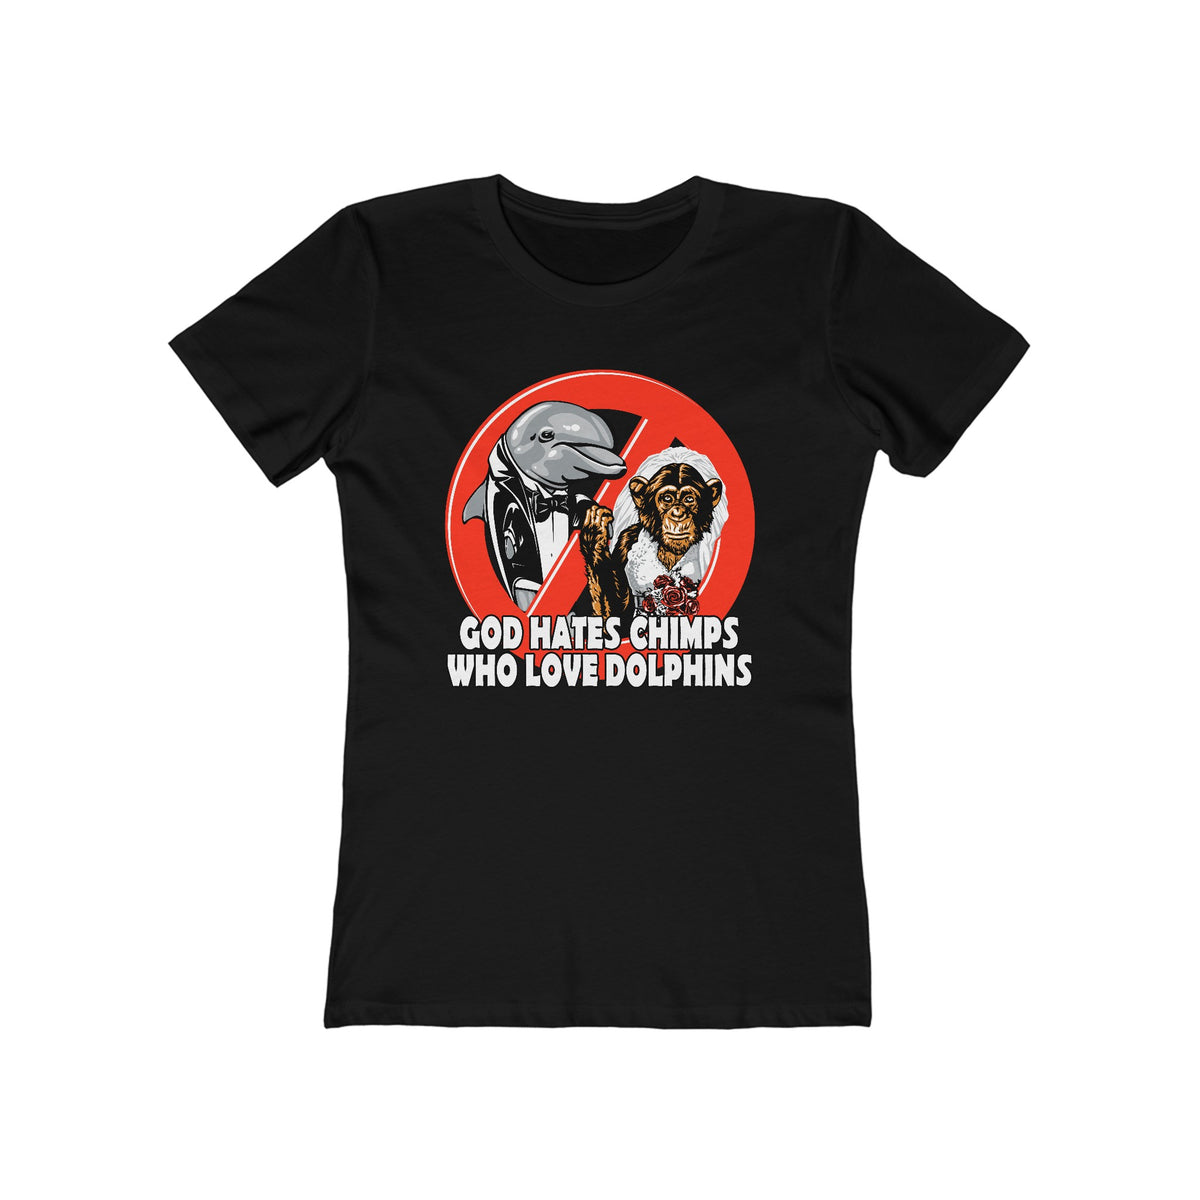 God Hates Chimps Who Love Dolphins- Women’s T-Shirt